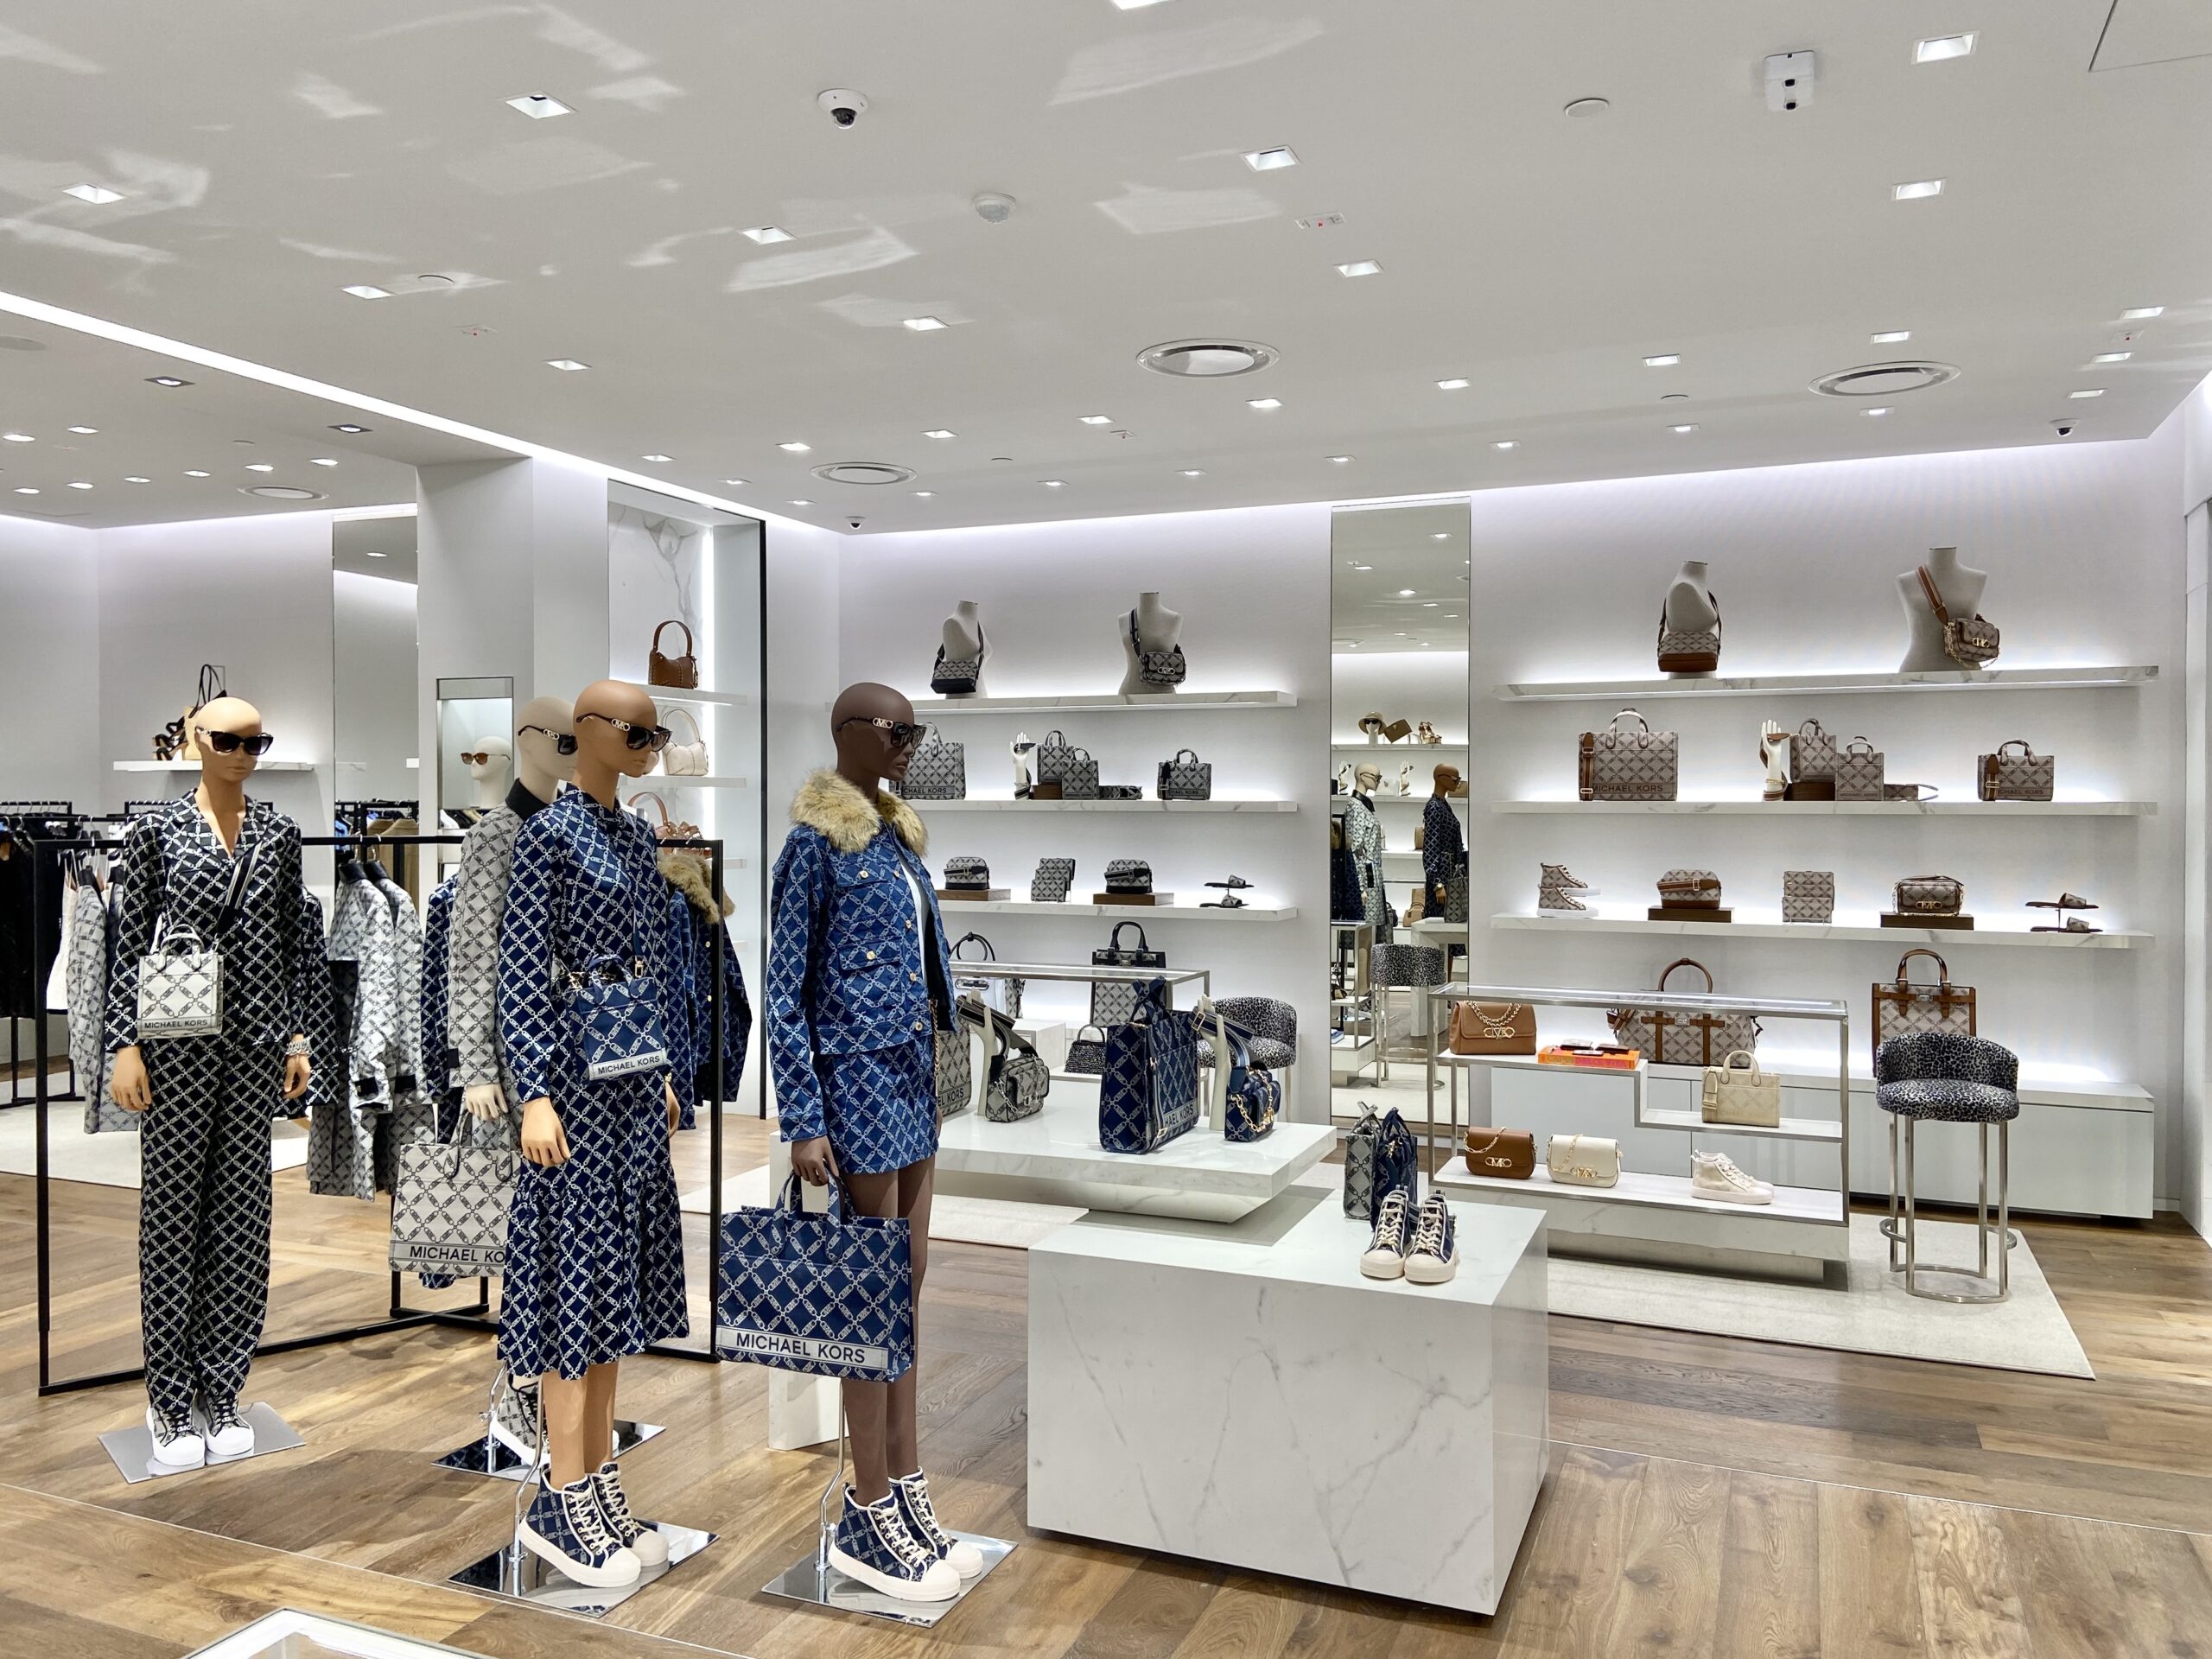 Michael Kors Unveils a Stunning New Store Concept in Vancouver | NUVO